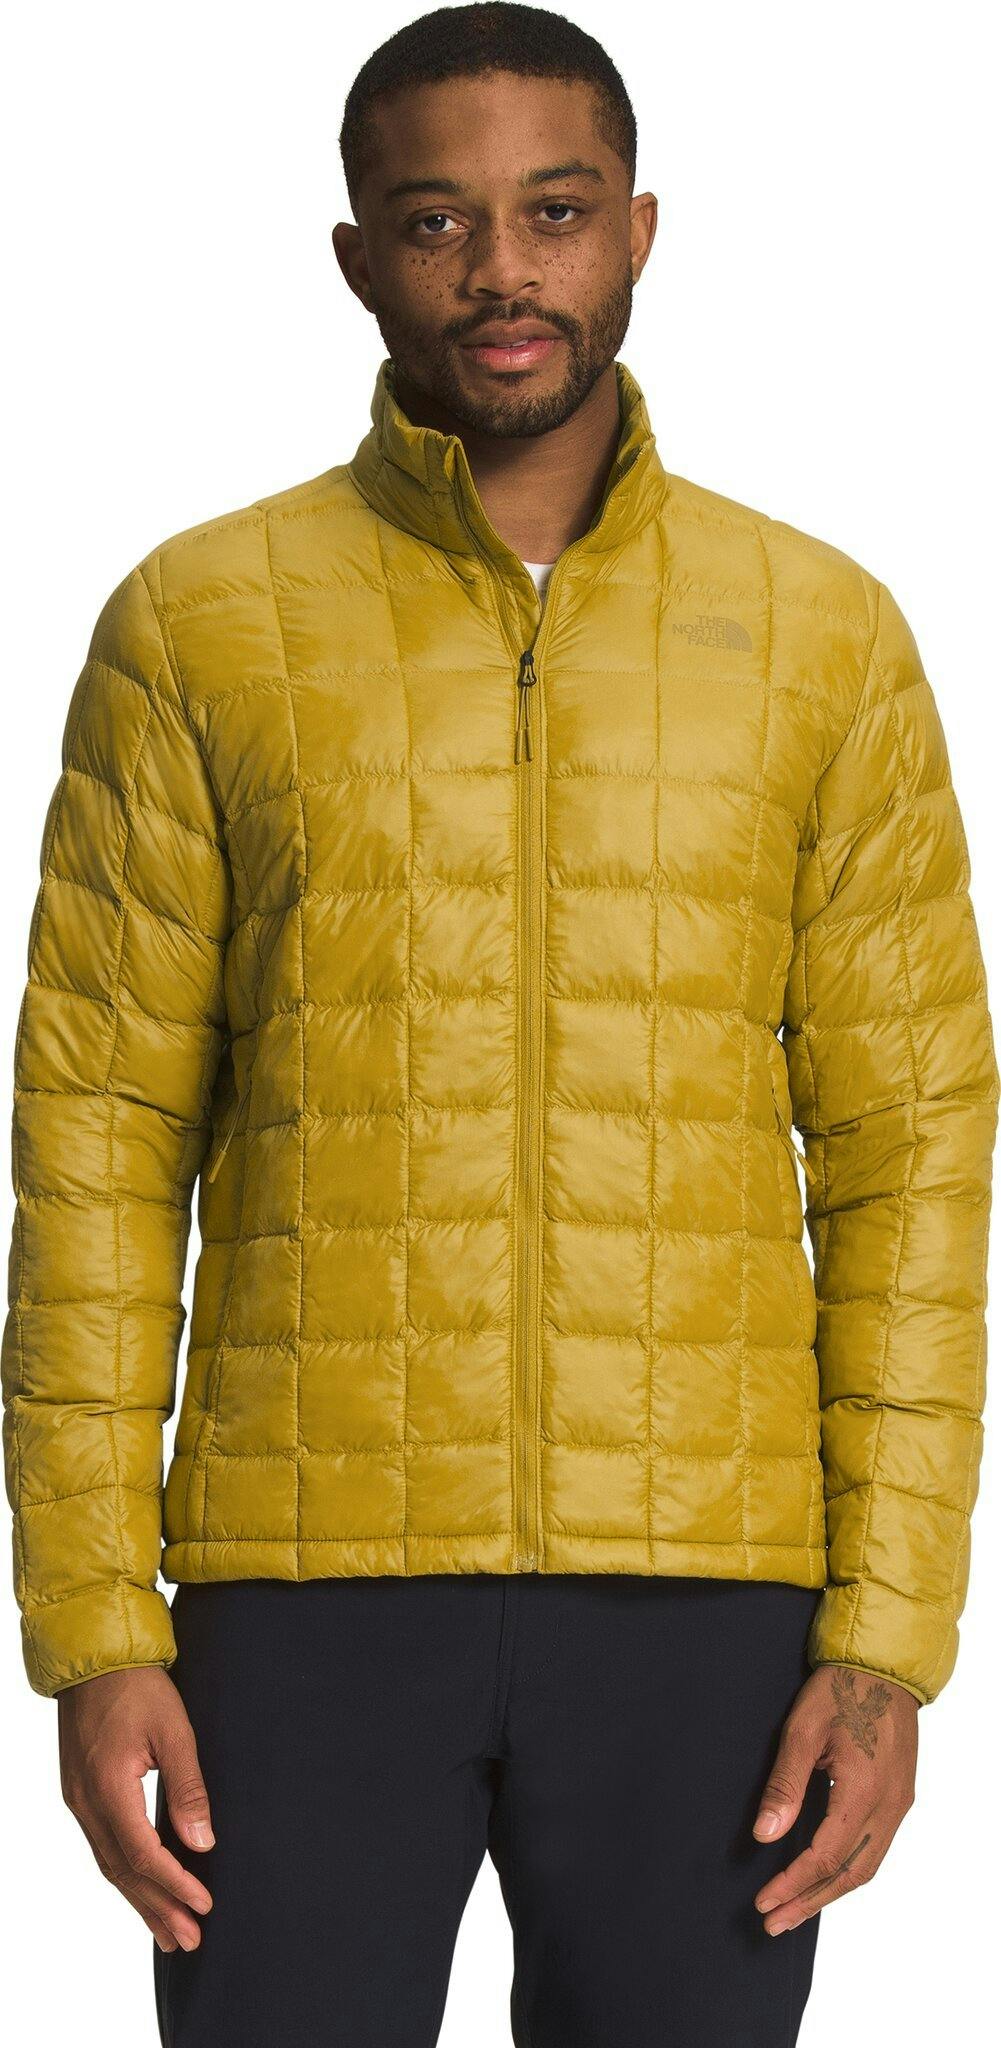 Product image for ThermoBall™ Eco Jacket 2.0 - Men's